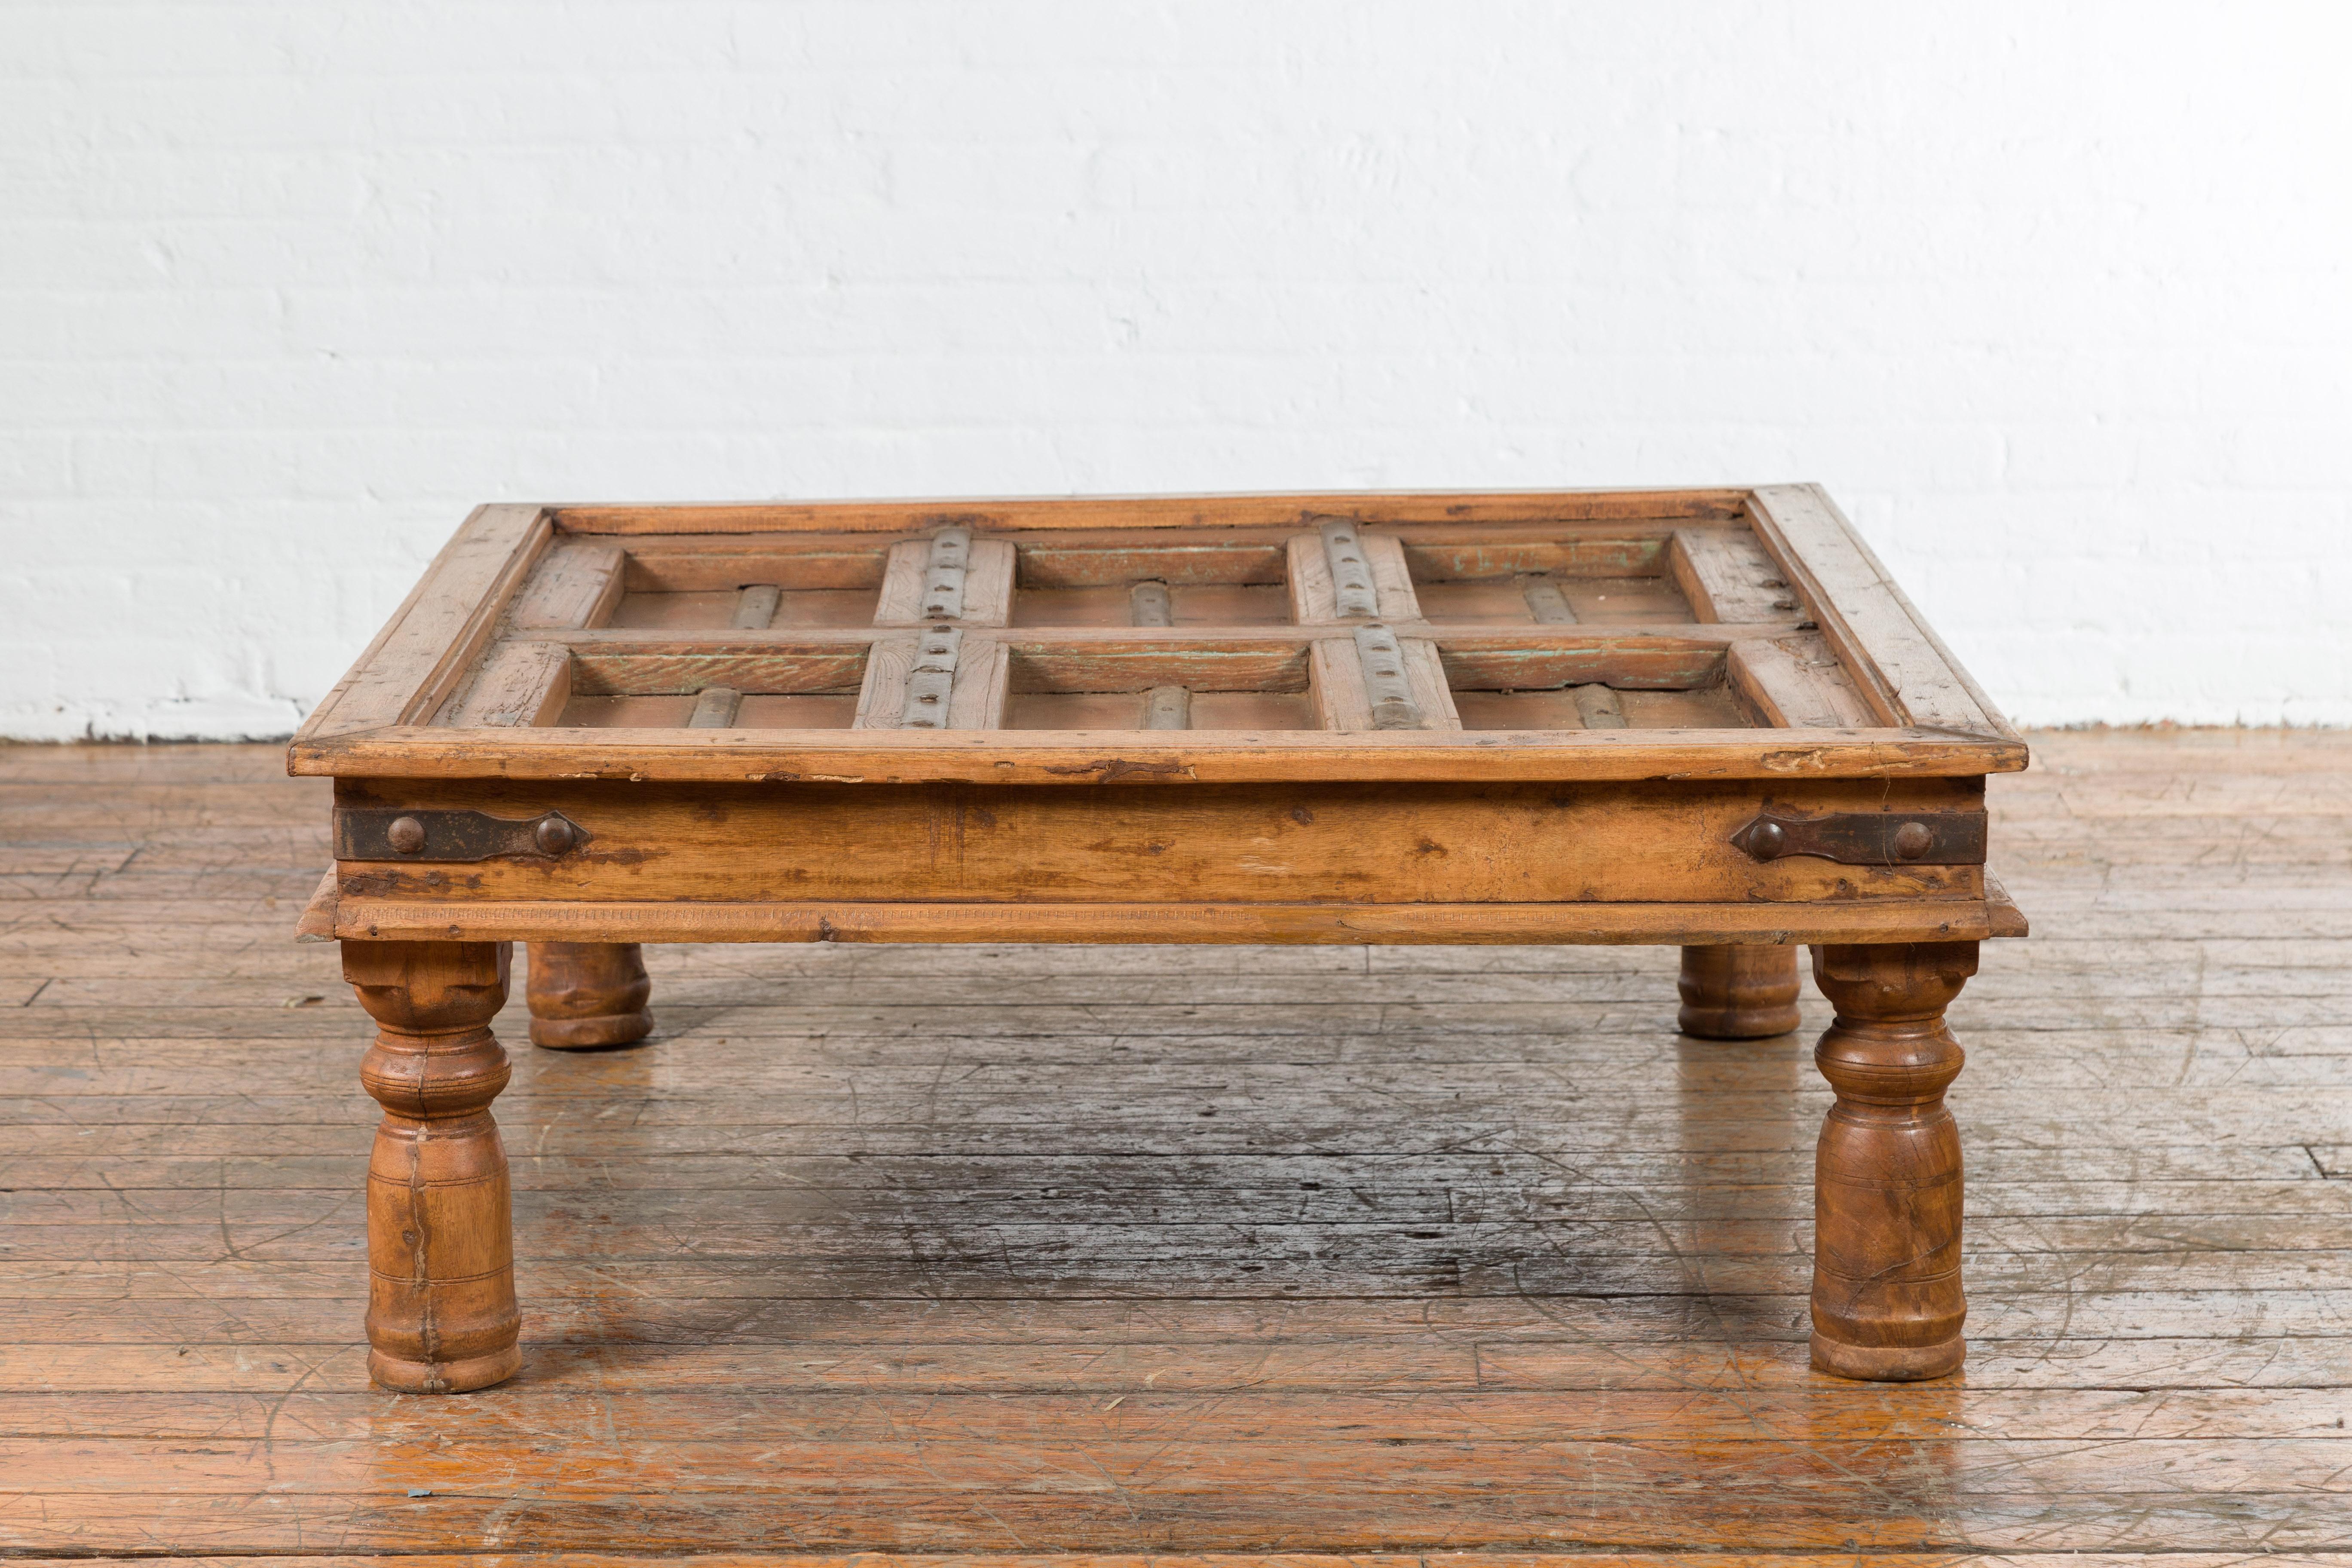 An old 19th century door from India that has been expertly converted into an antique coffee table. The antique door showcases a succession of recessed panels and is accented with iron studs. Our unique antique table is beveled so that you can fit a